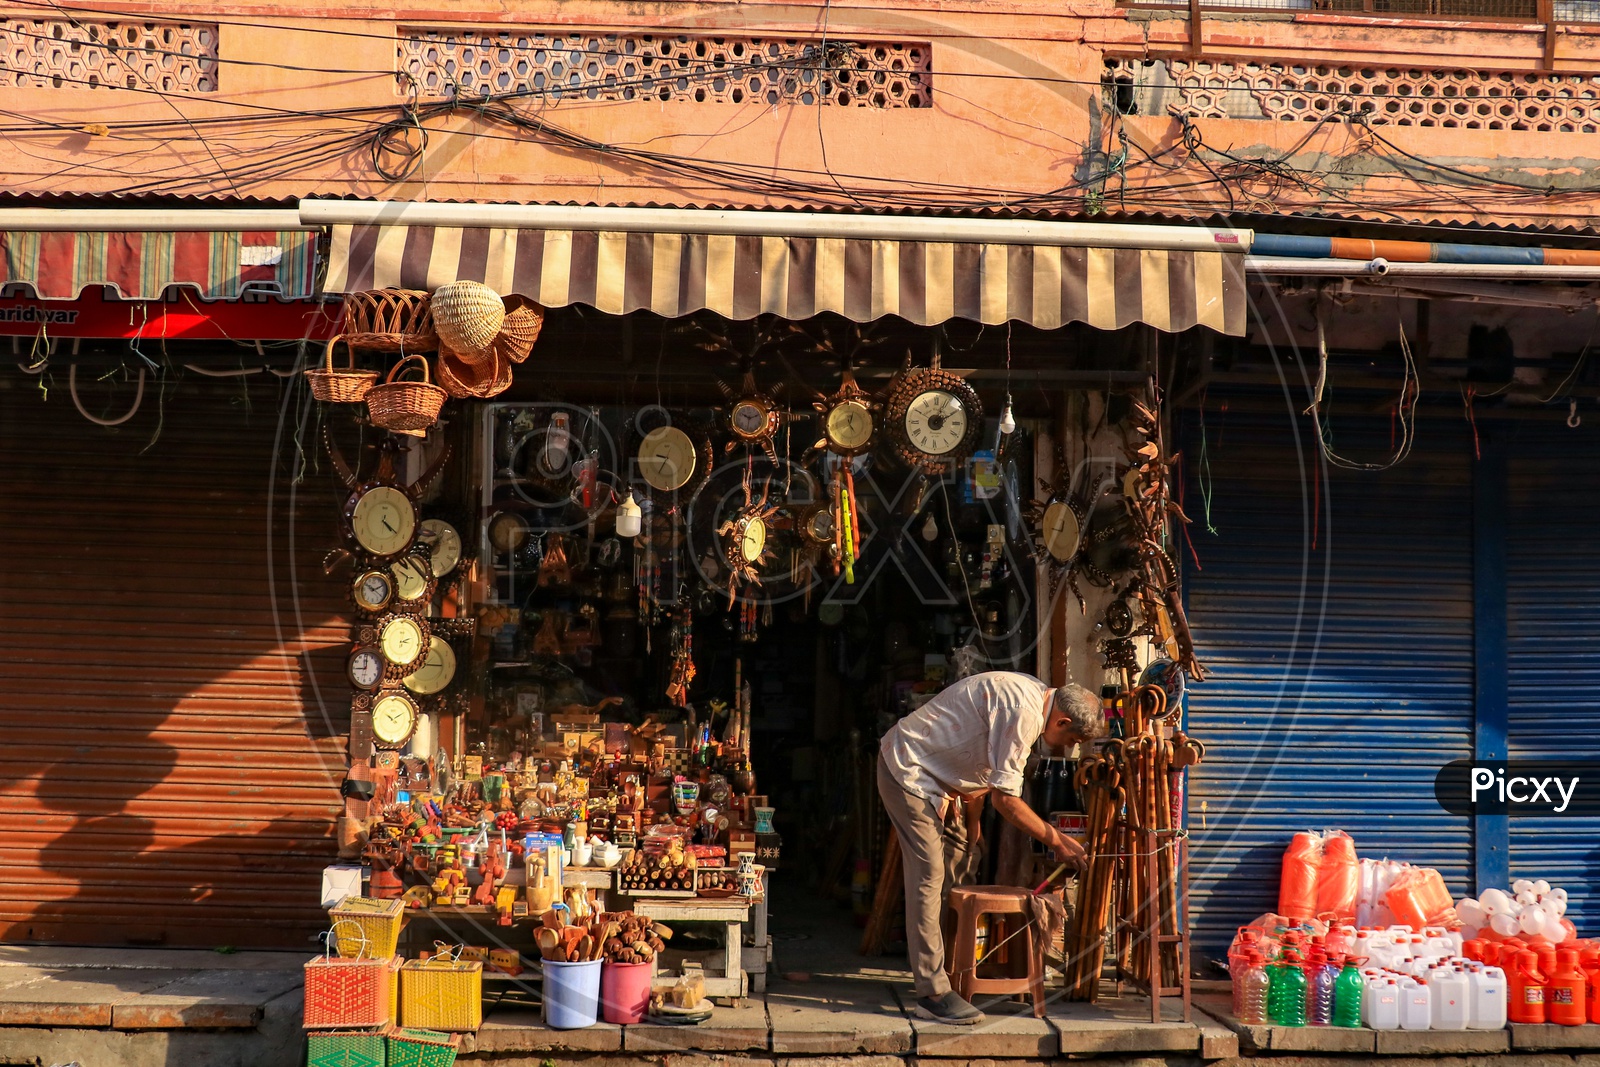 A shop owner setting up his shop in the morning